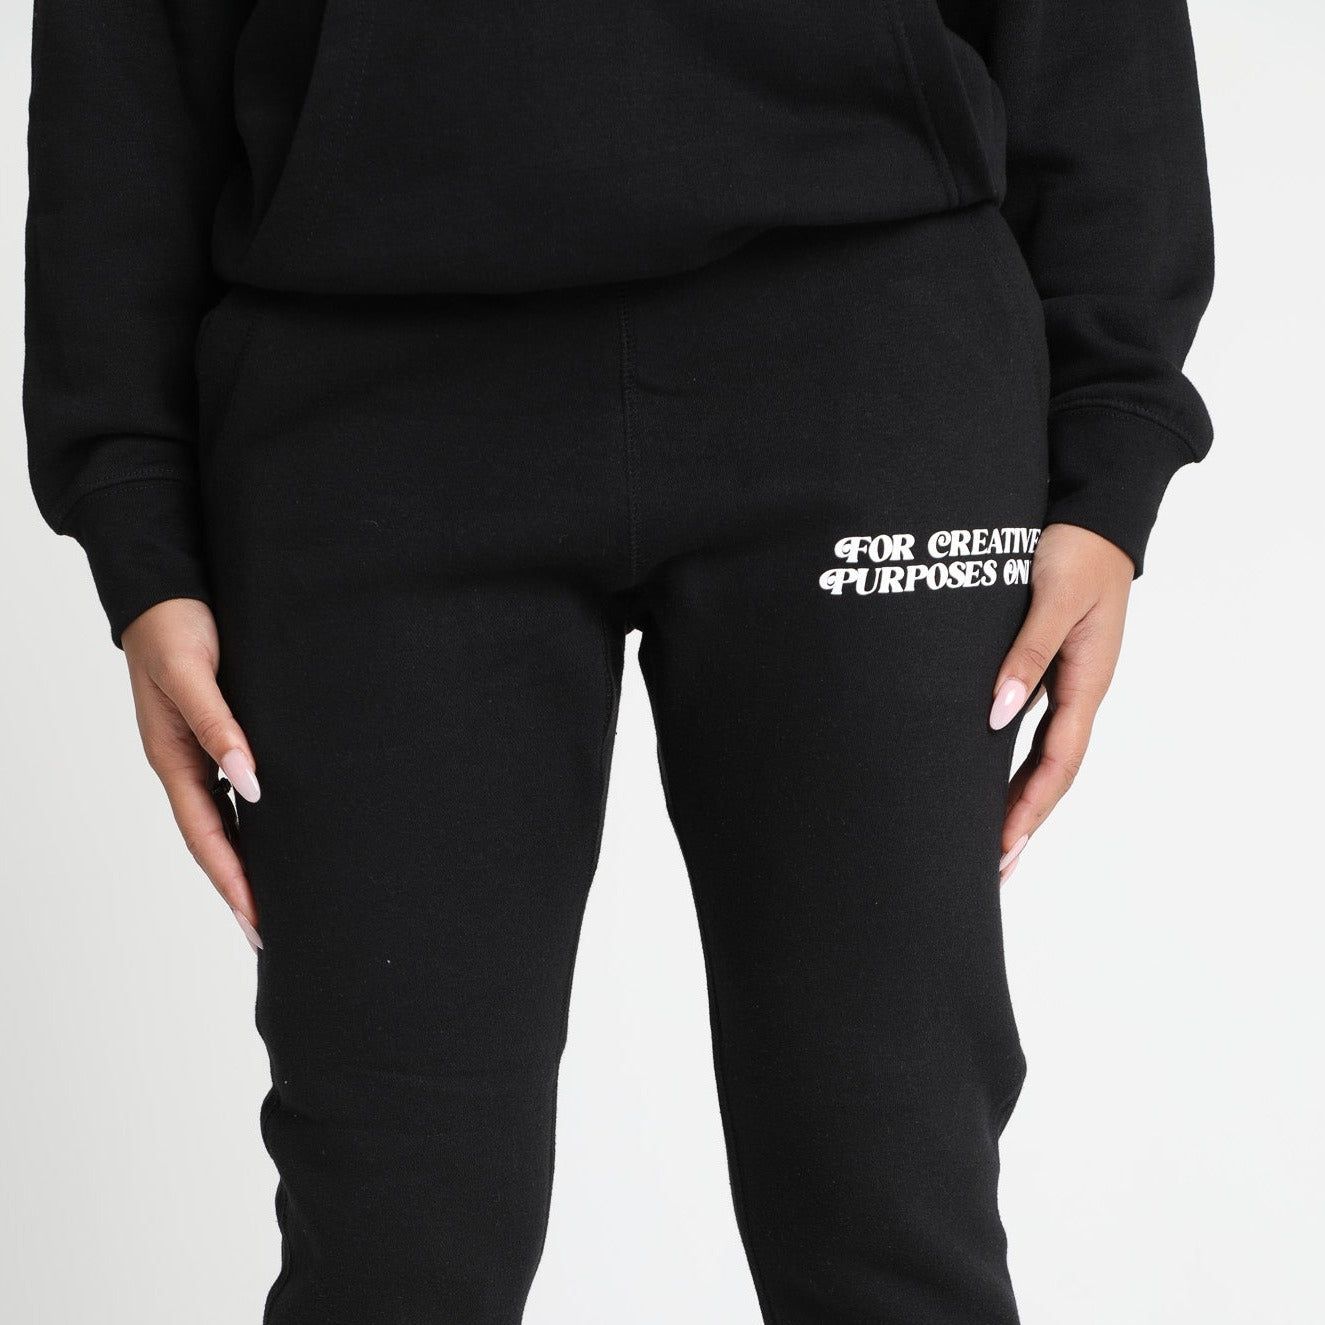 For Creative Purposes Only - Joggers (Black + White)